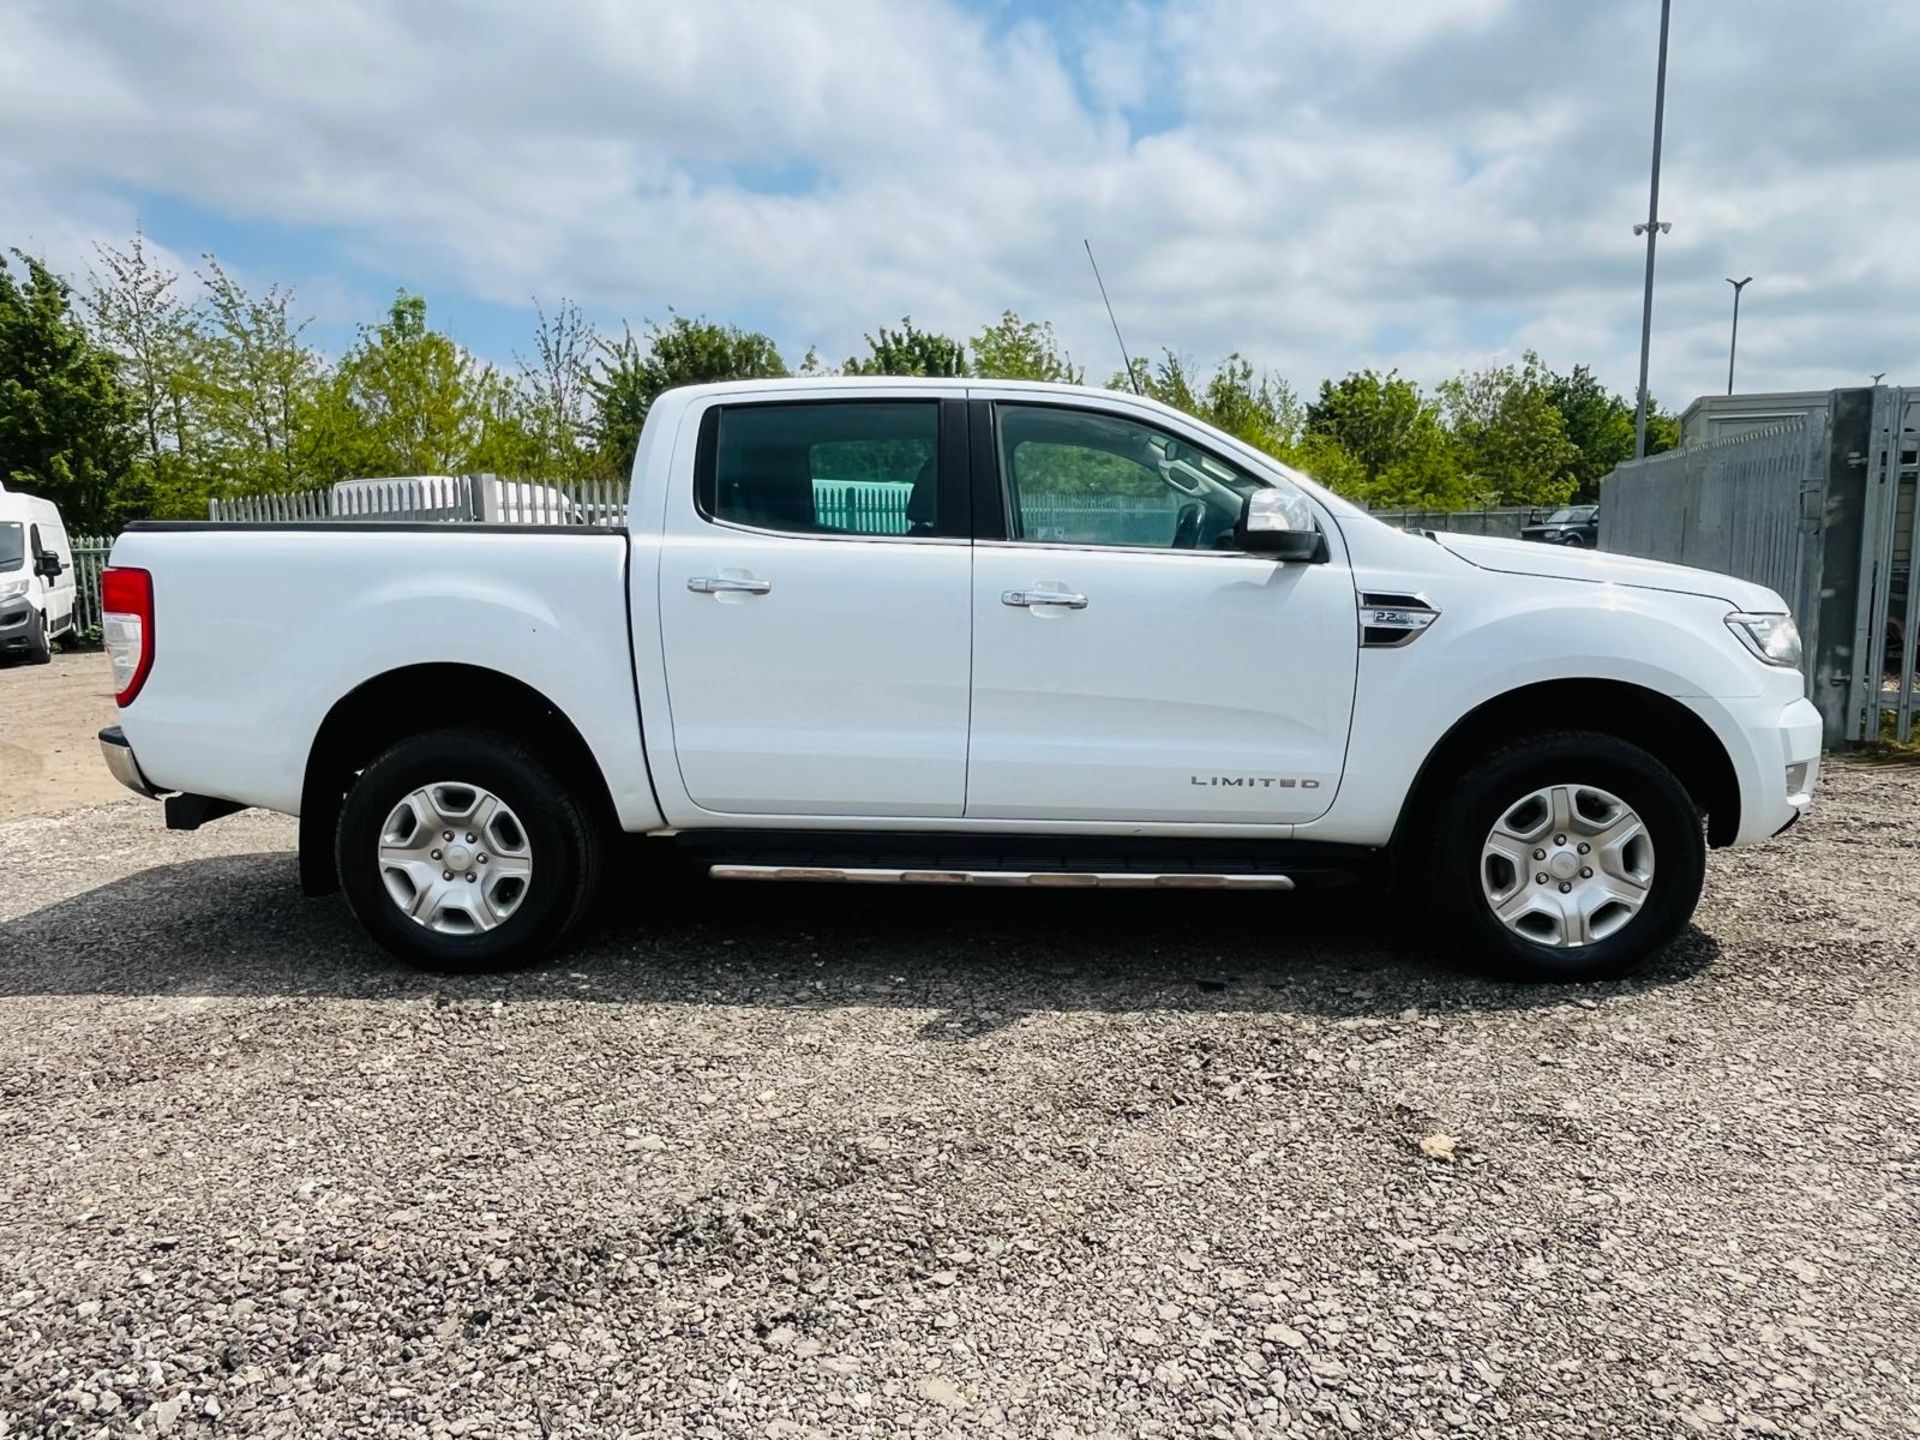 ** ON SALE ** Ford Ranger Limited 2.2 TDCI 4WD 2018 '18 Reg' -Automatic- ULEZ Compliant -A/C - Image 9 of 31